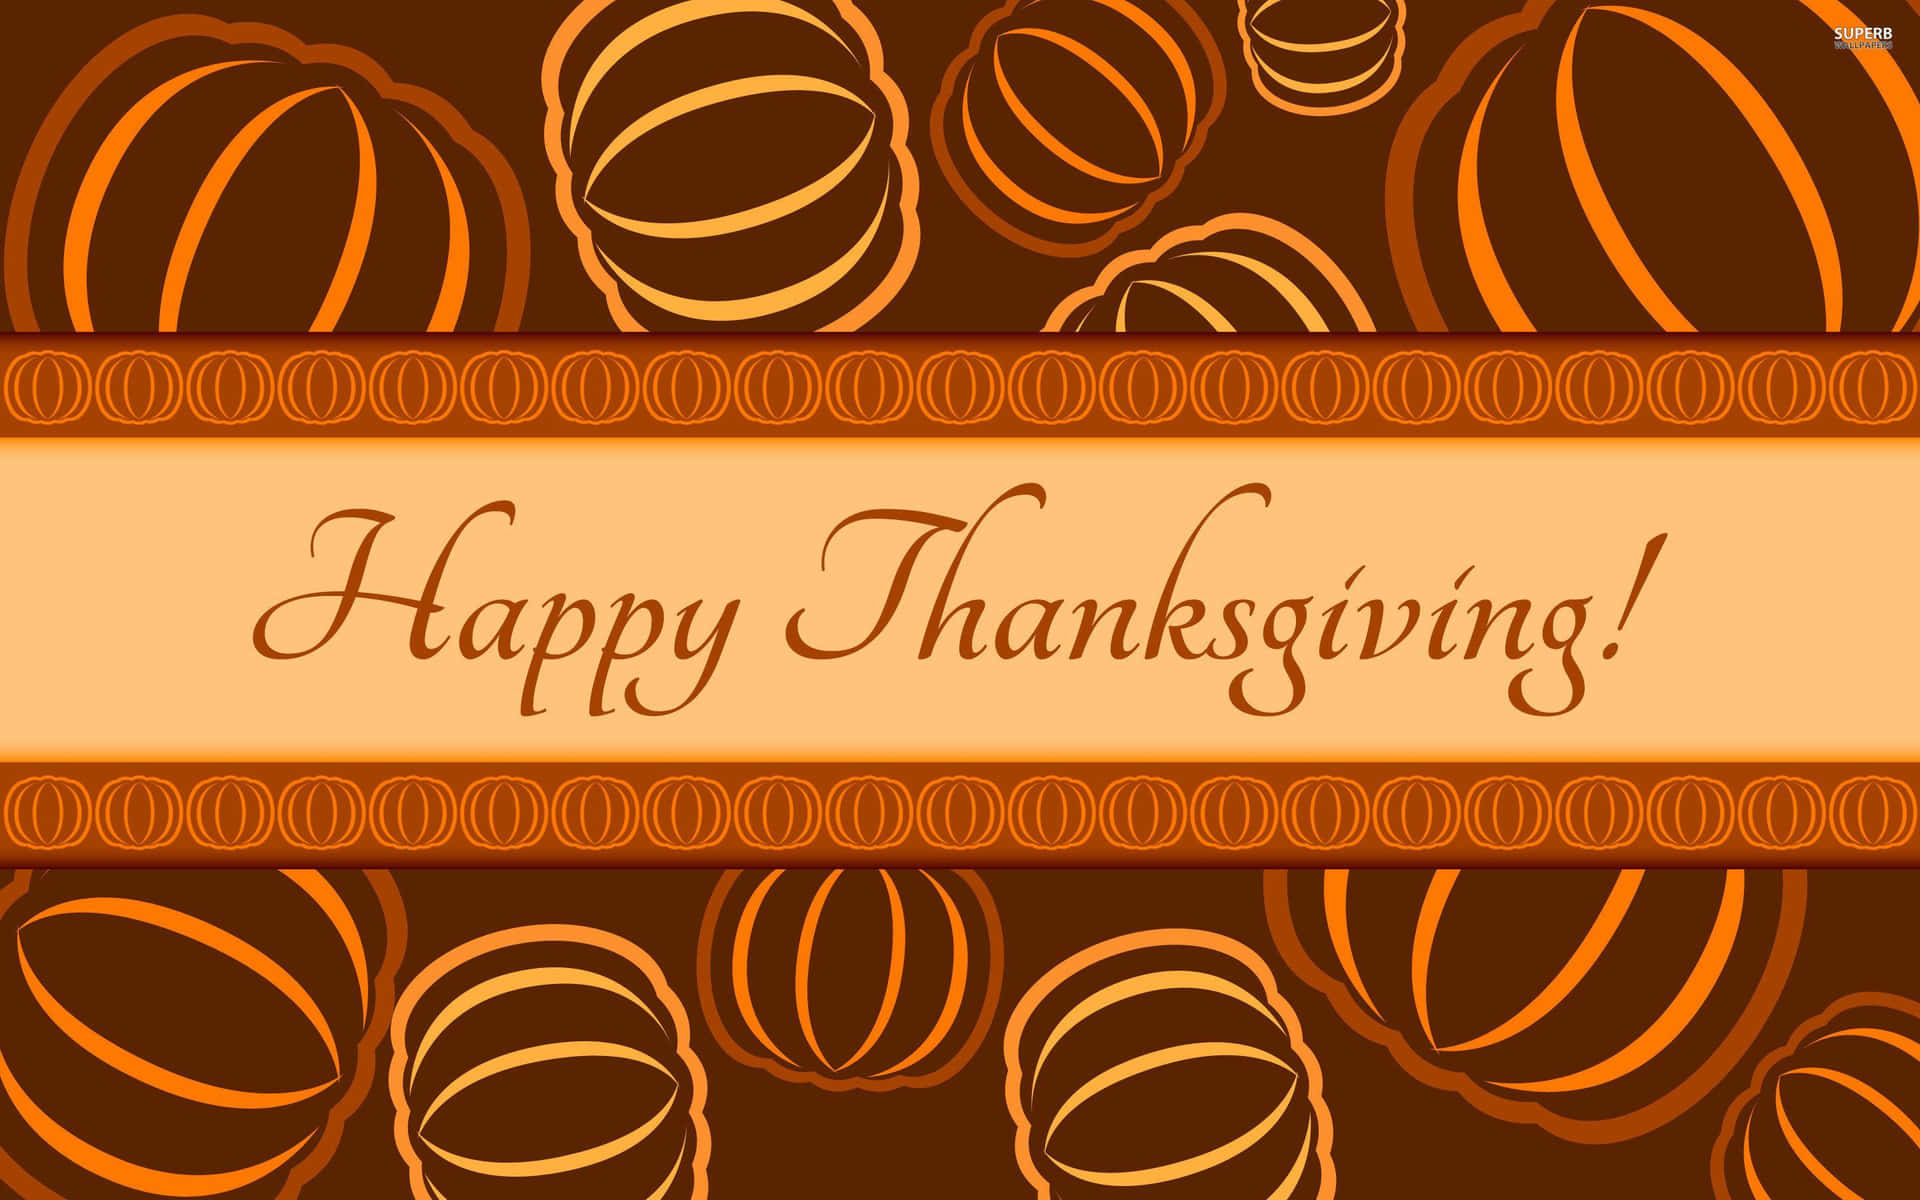 Sending warm wishes of joy and blessings this Thanksgiving